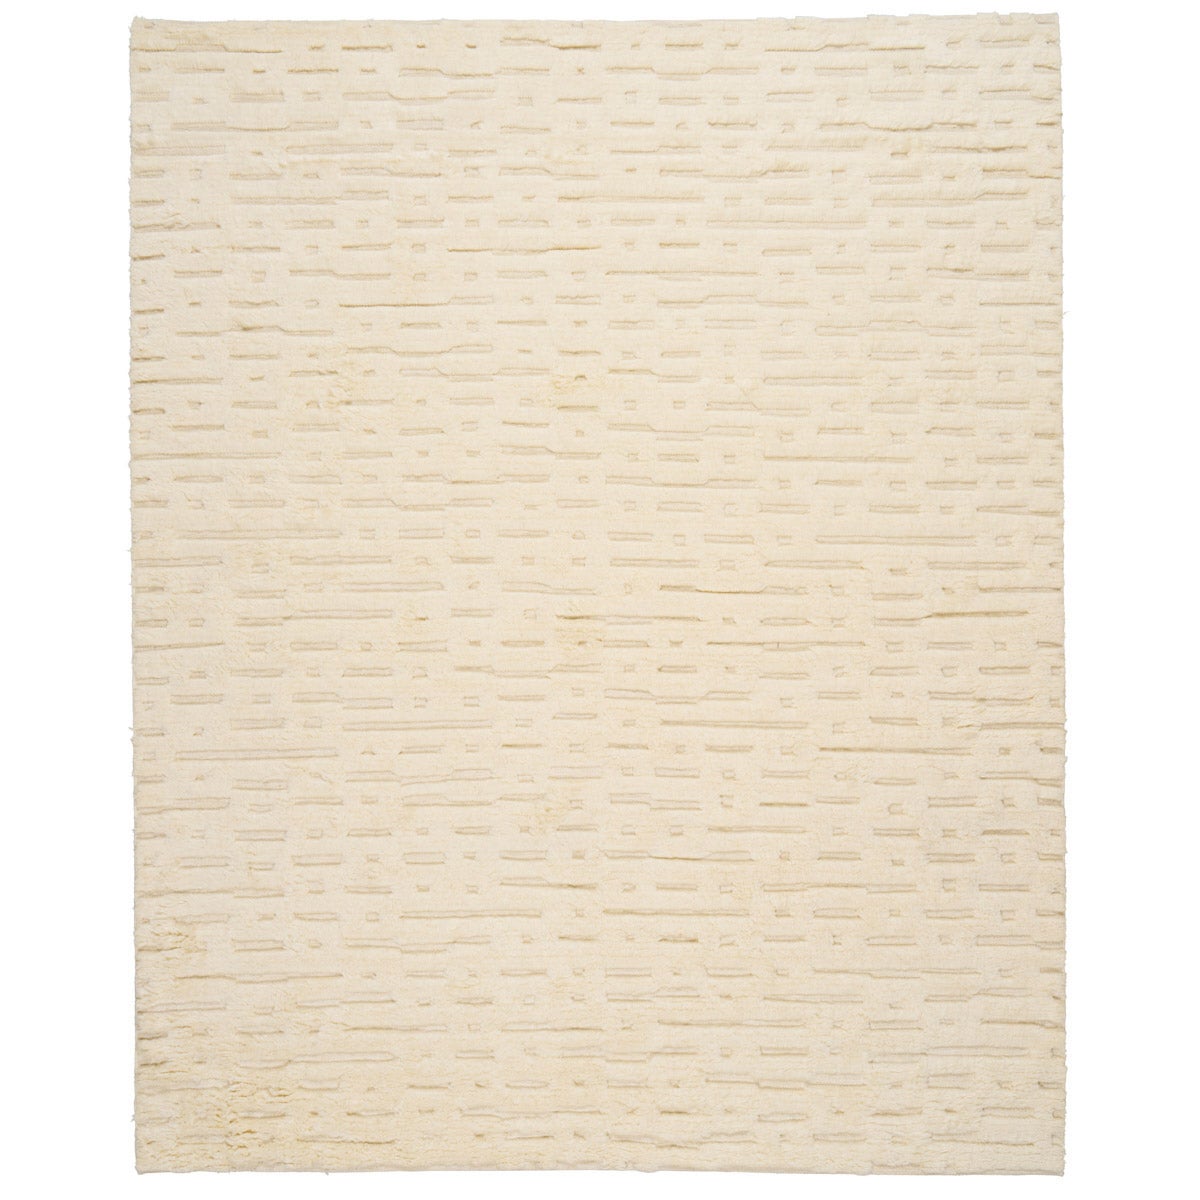 Schumacher Abstract Ikat Rug in Ivory, 9x12'